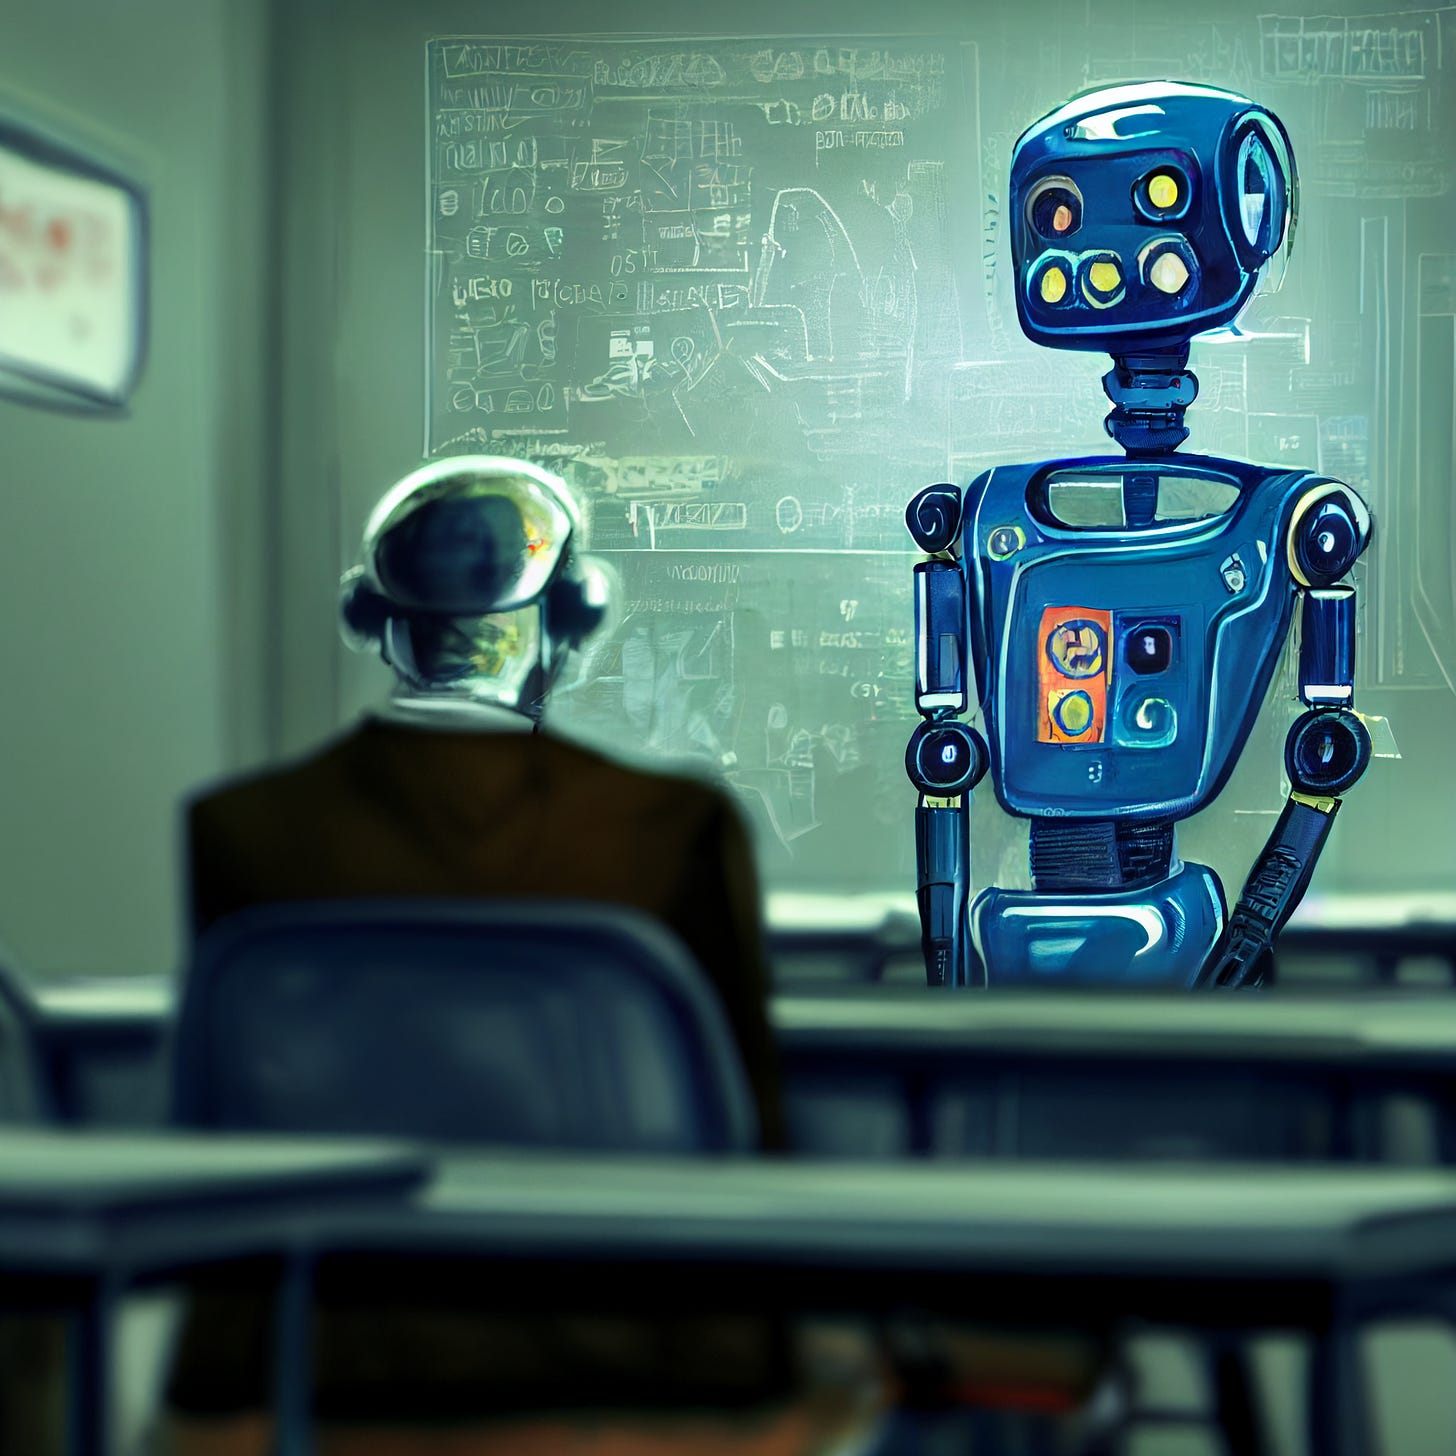 2 robots in classroom with blackboard, one standing with the other sitting in the style of student and teacher